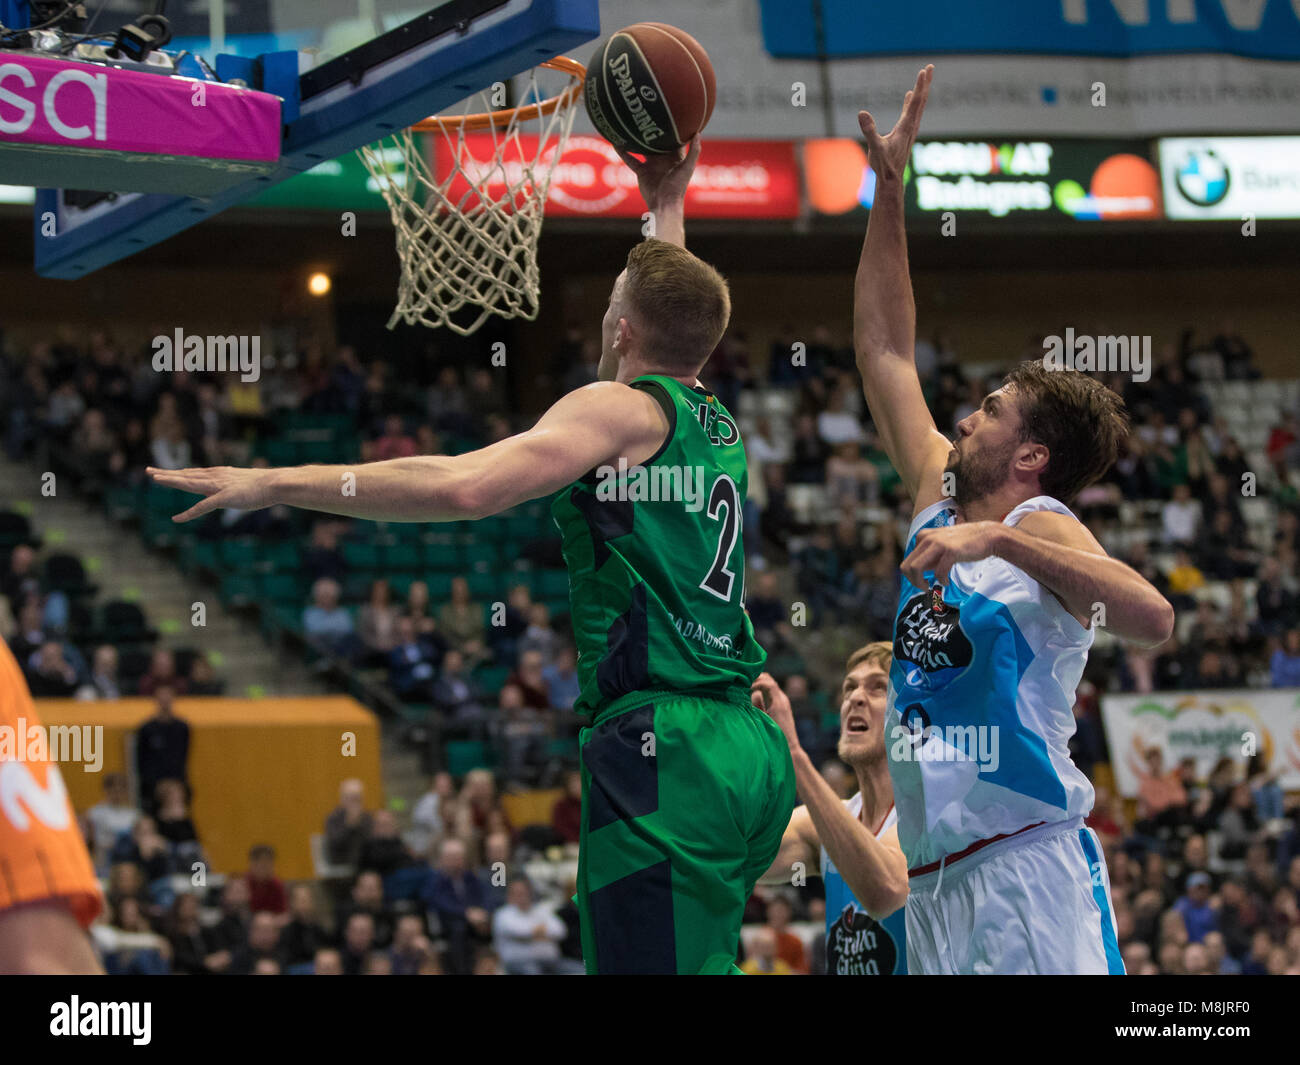 Badalona, Spain. 17th Mar, 2018. 17th March 2018; Tomasz Gielo, #21 of Divina Joventut in action with Nacho Llovet, #9 of Monbus Obradoiro during the 2017/2018 Liga ACB Endesa Round 23 game between Divina Joventut and Monbus Obradoiro at Pabellon Olimpico de Badalona on March 17, 2018 in Barcelona, Spain. Credit: Ukko Images/Pacific Press/Alamy Live News Stock Photo